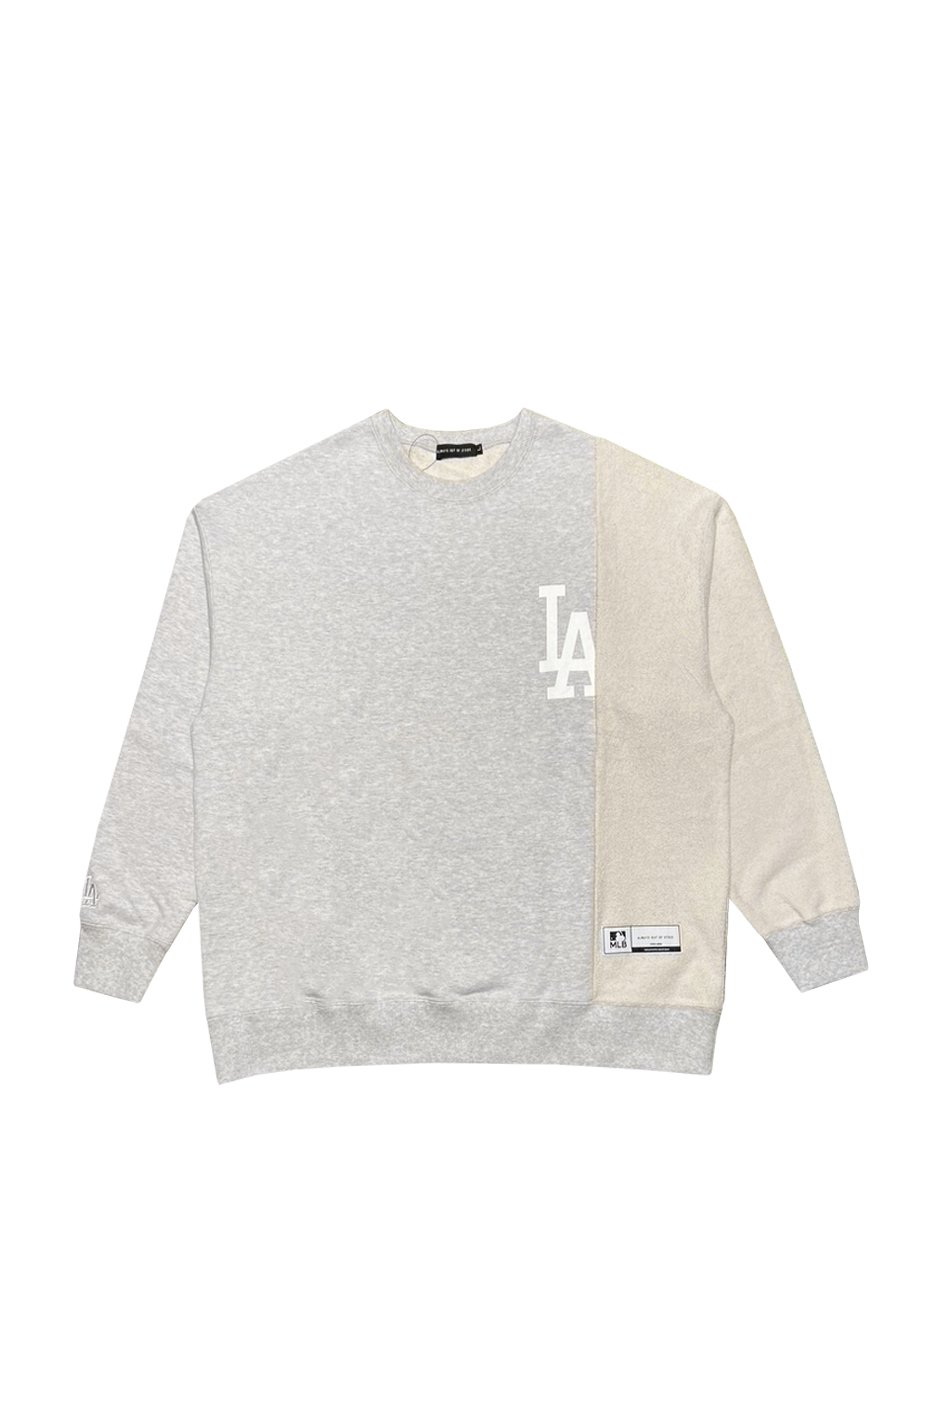 MLB SWITCHED CREW NECK 【DODGERS】